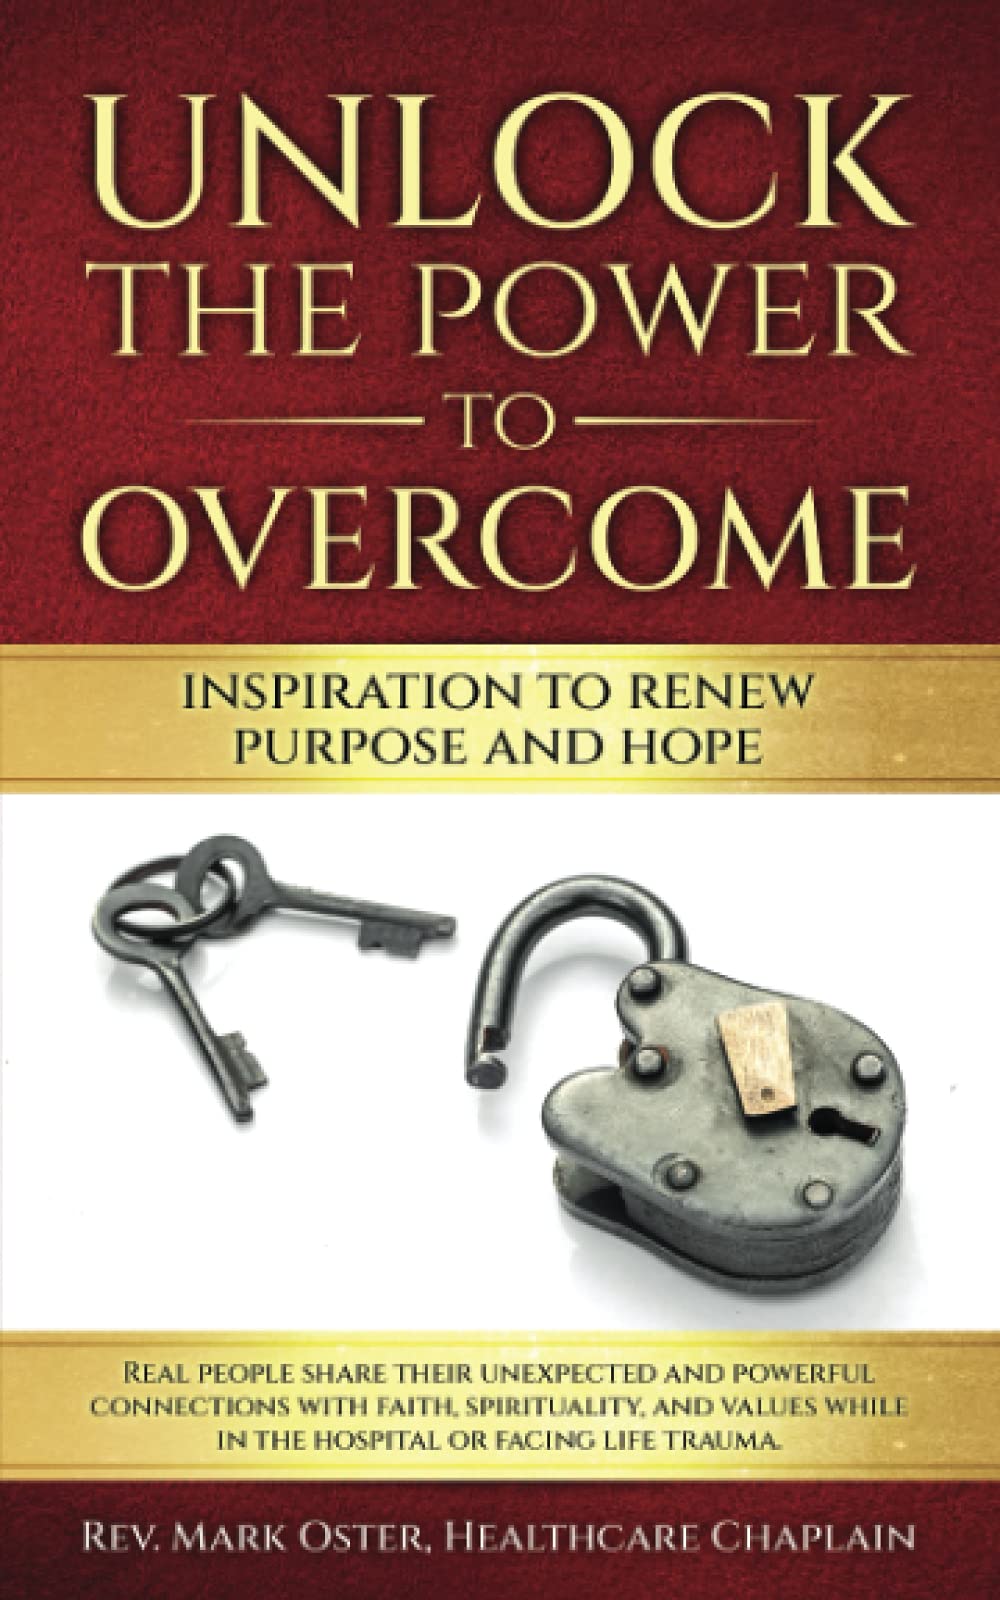 Unlock the Power to Overcome by Mark Oster